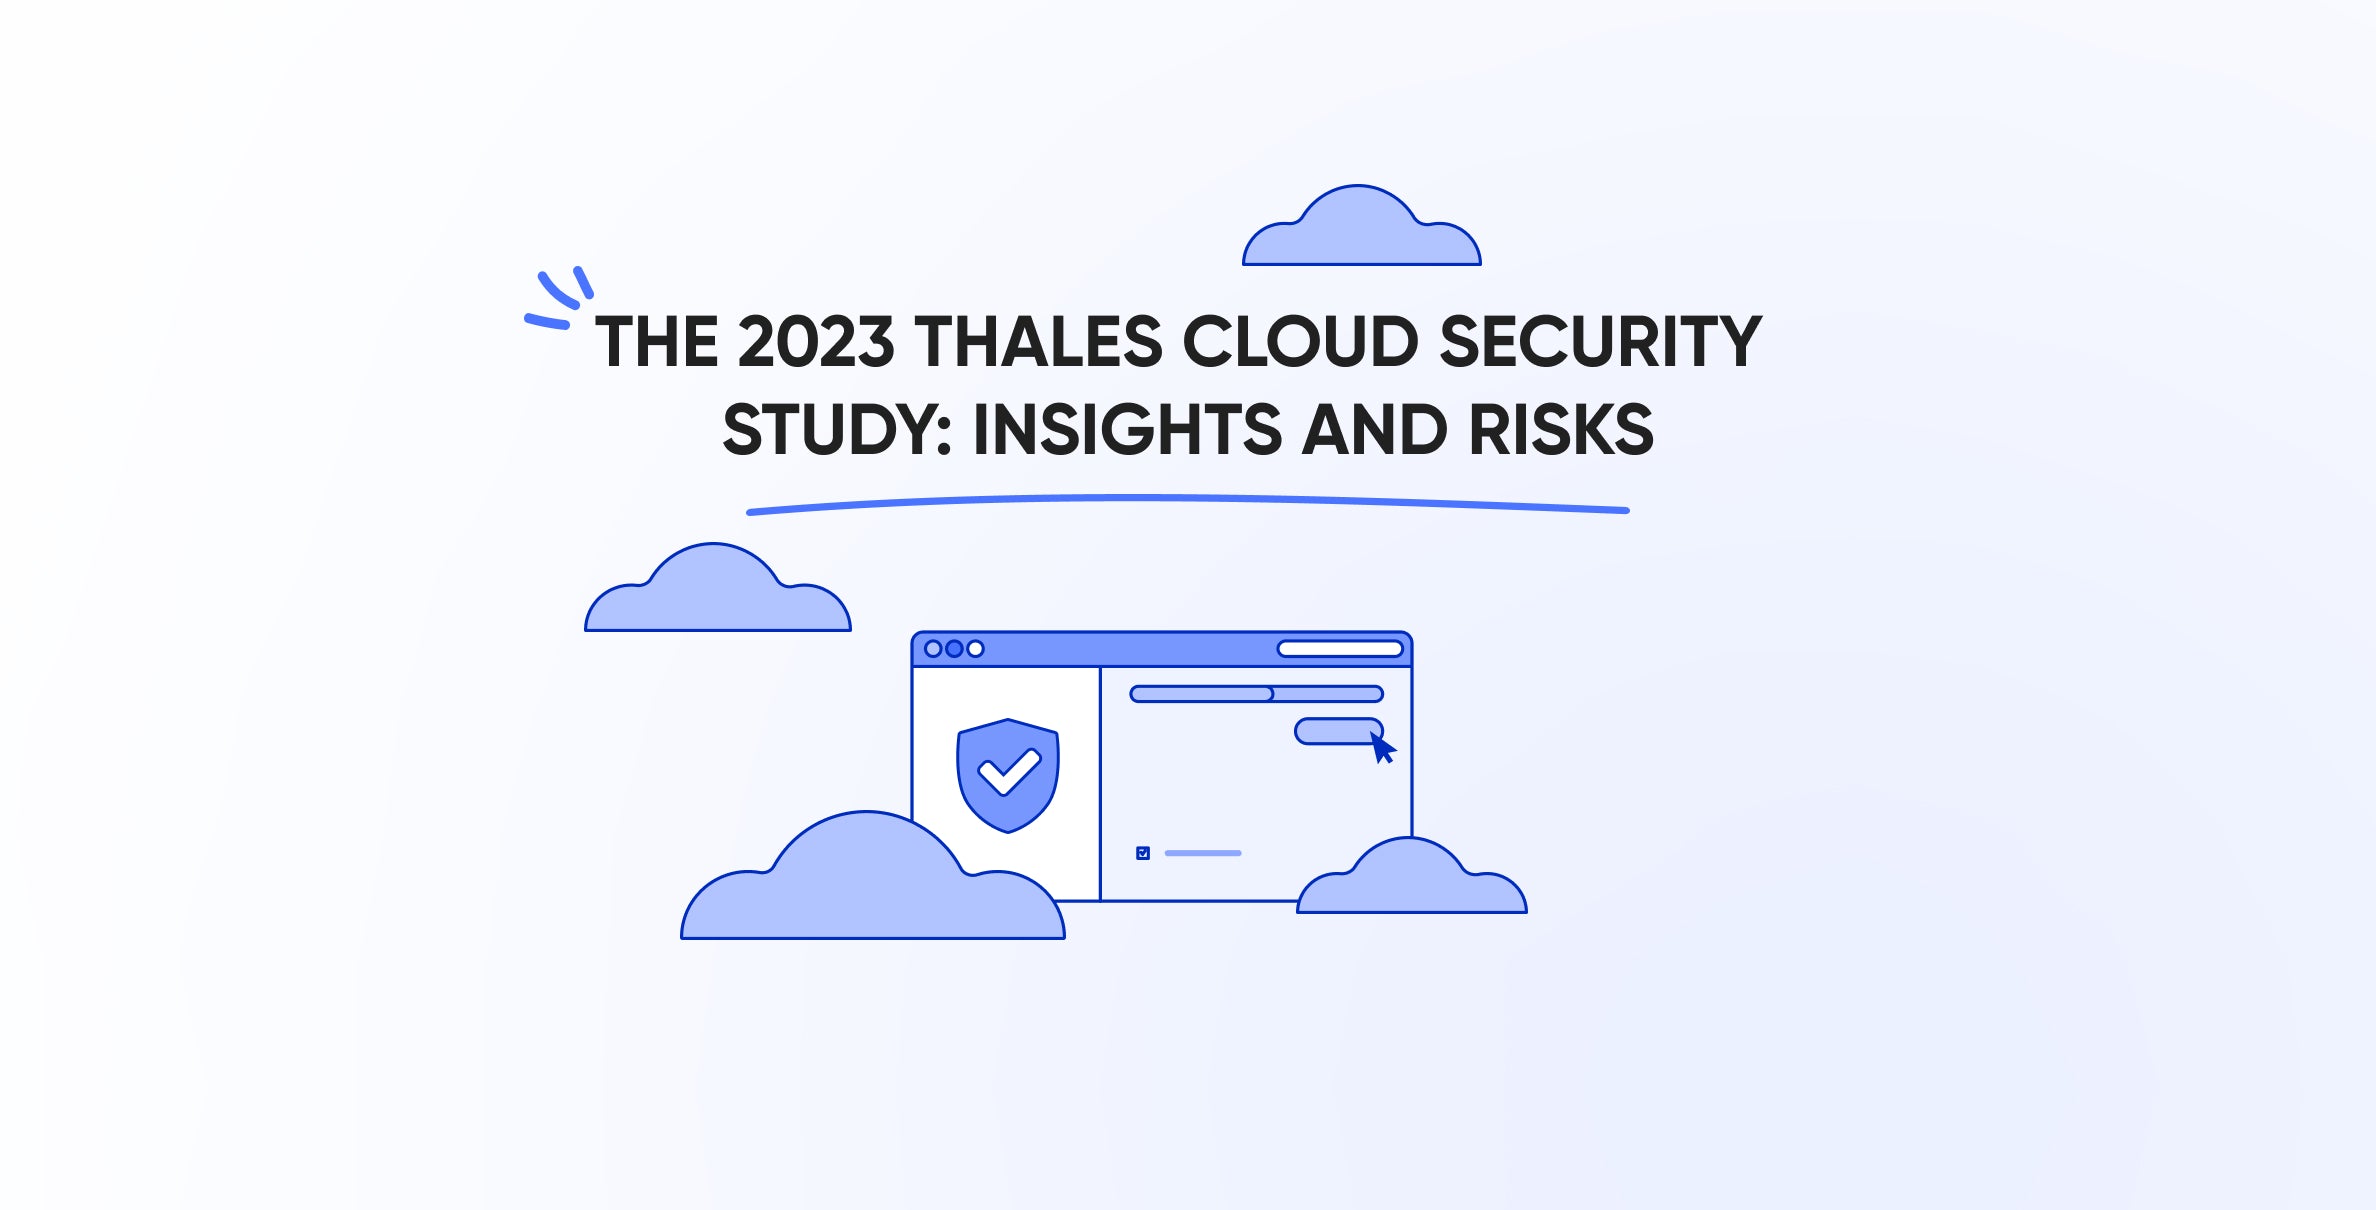 The 2023 Thales Cloud Security Study: insights and risks